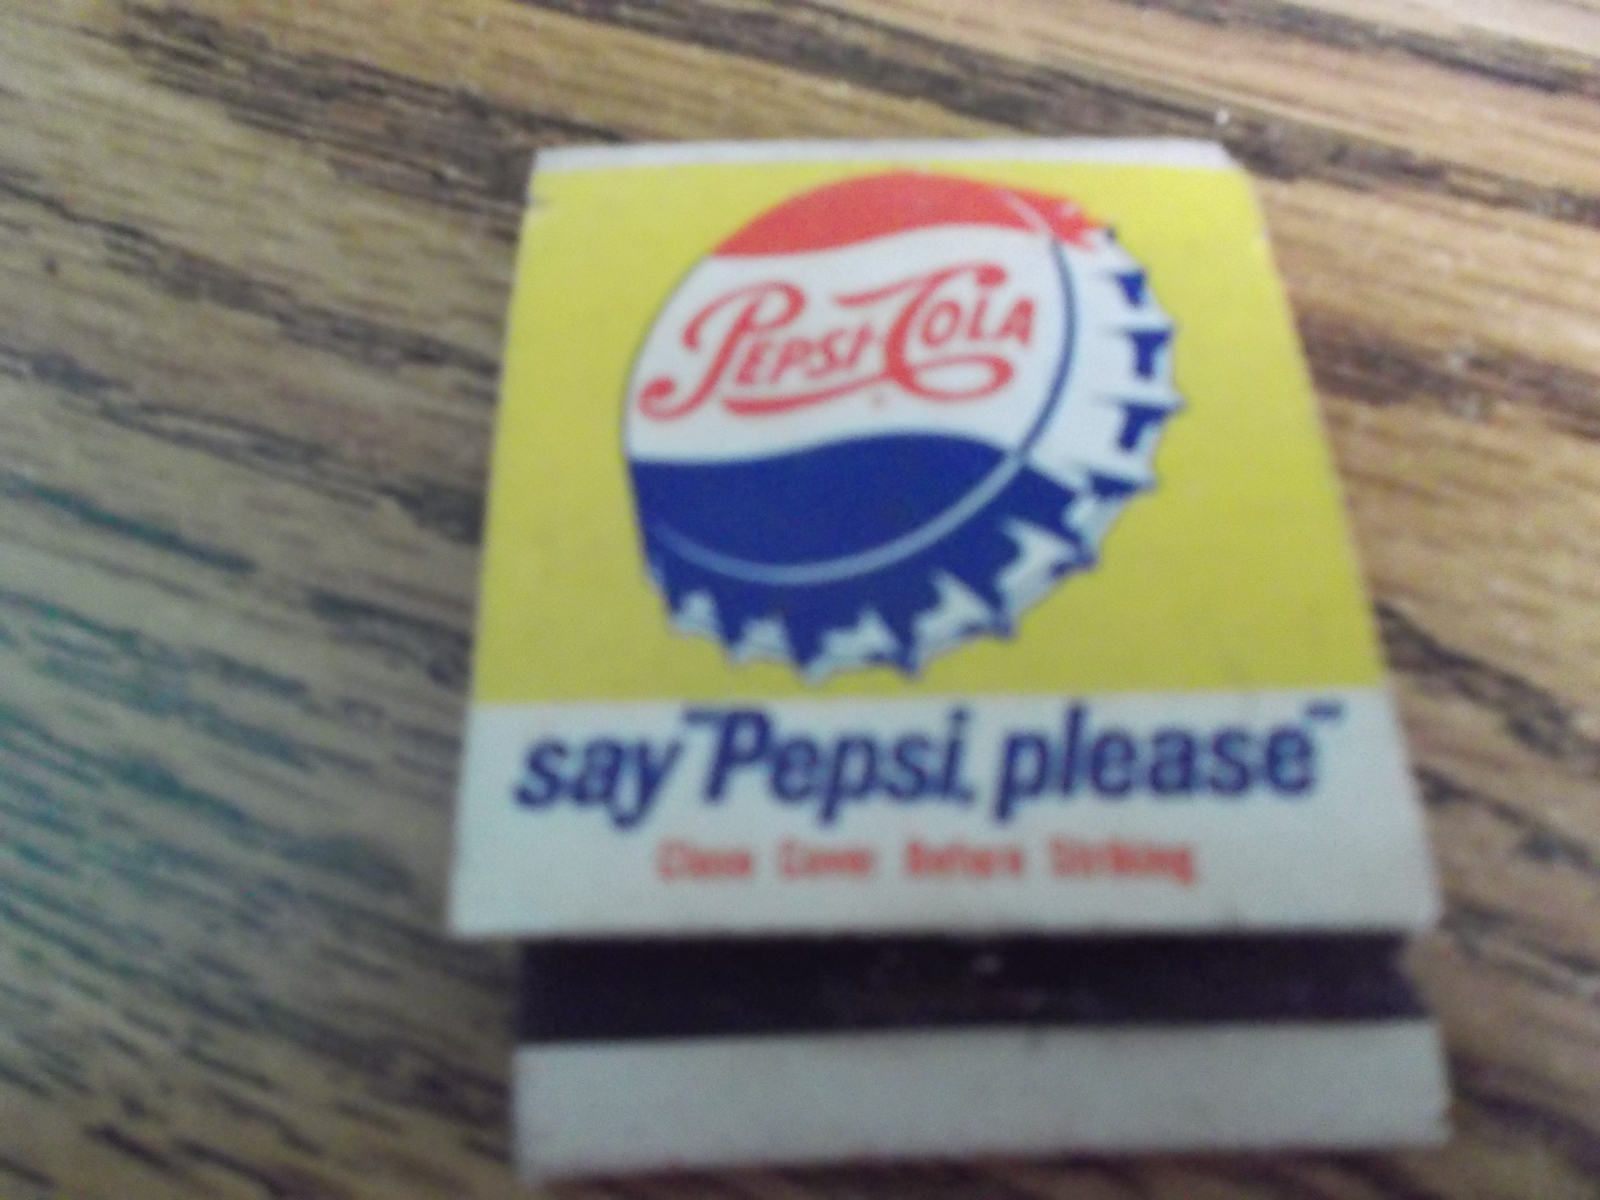 Pepsi-Cola Matchbook For Those Who Think young campaign w some missing matches - $6.00